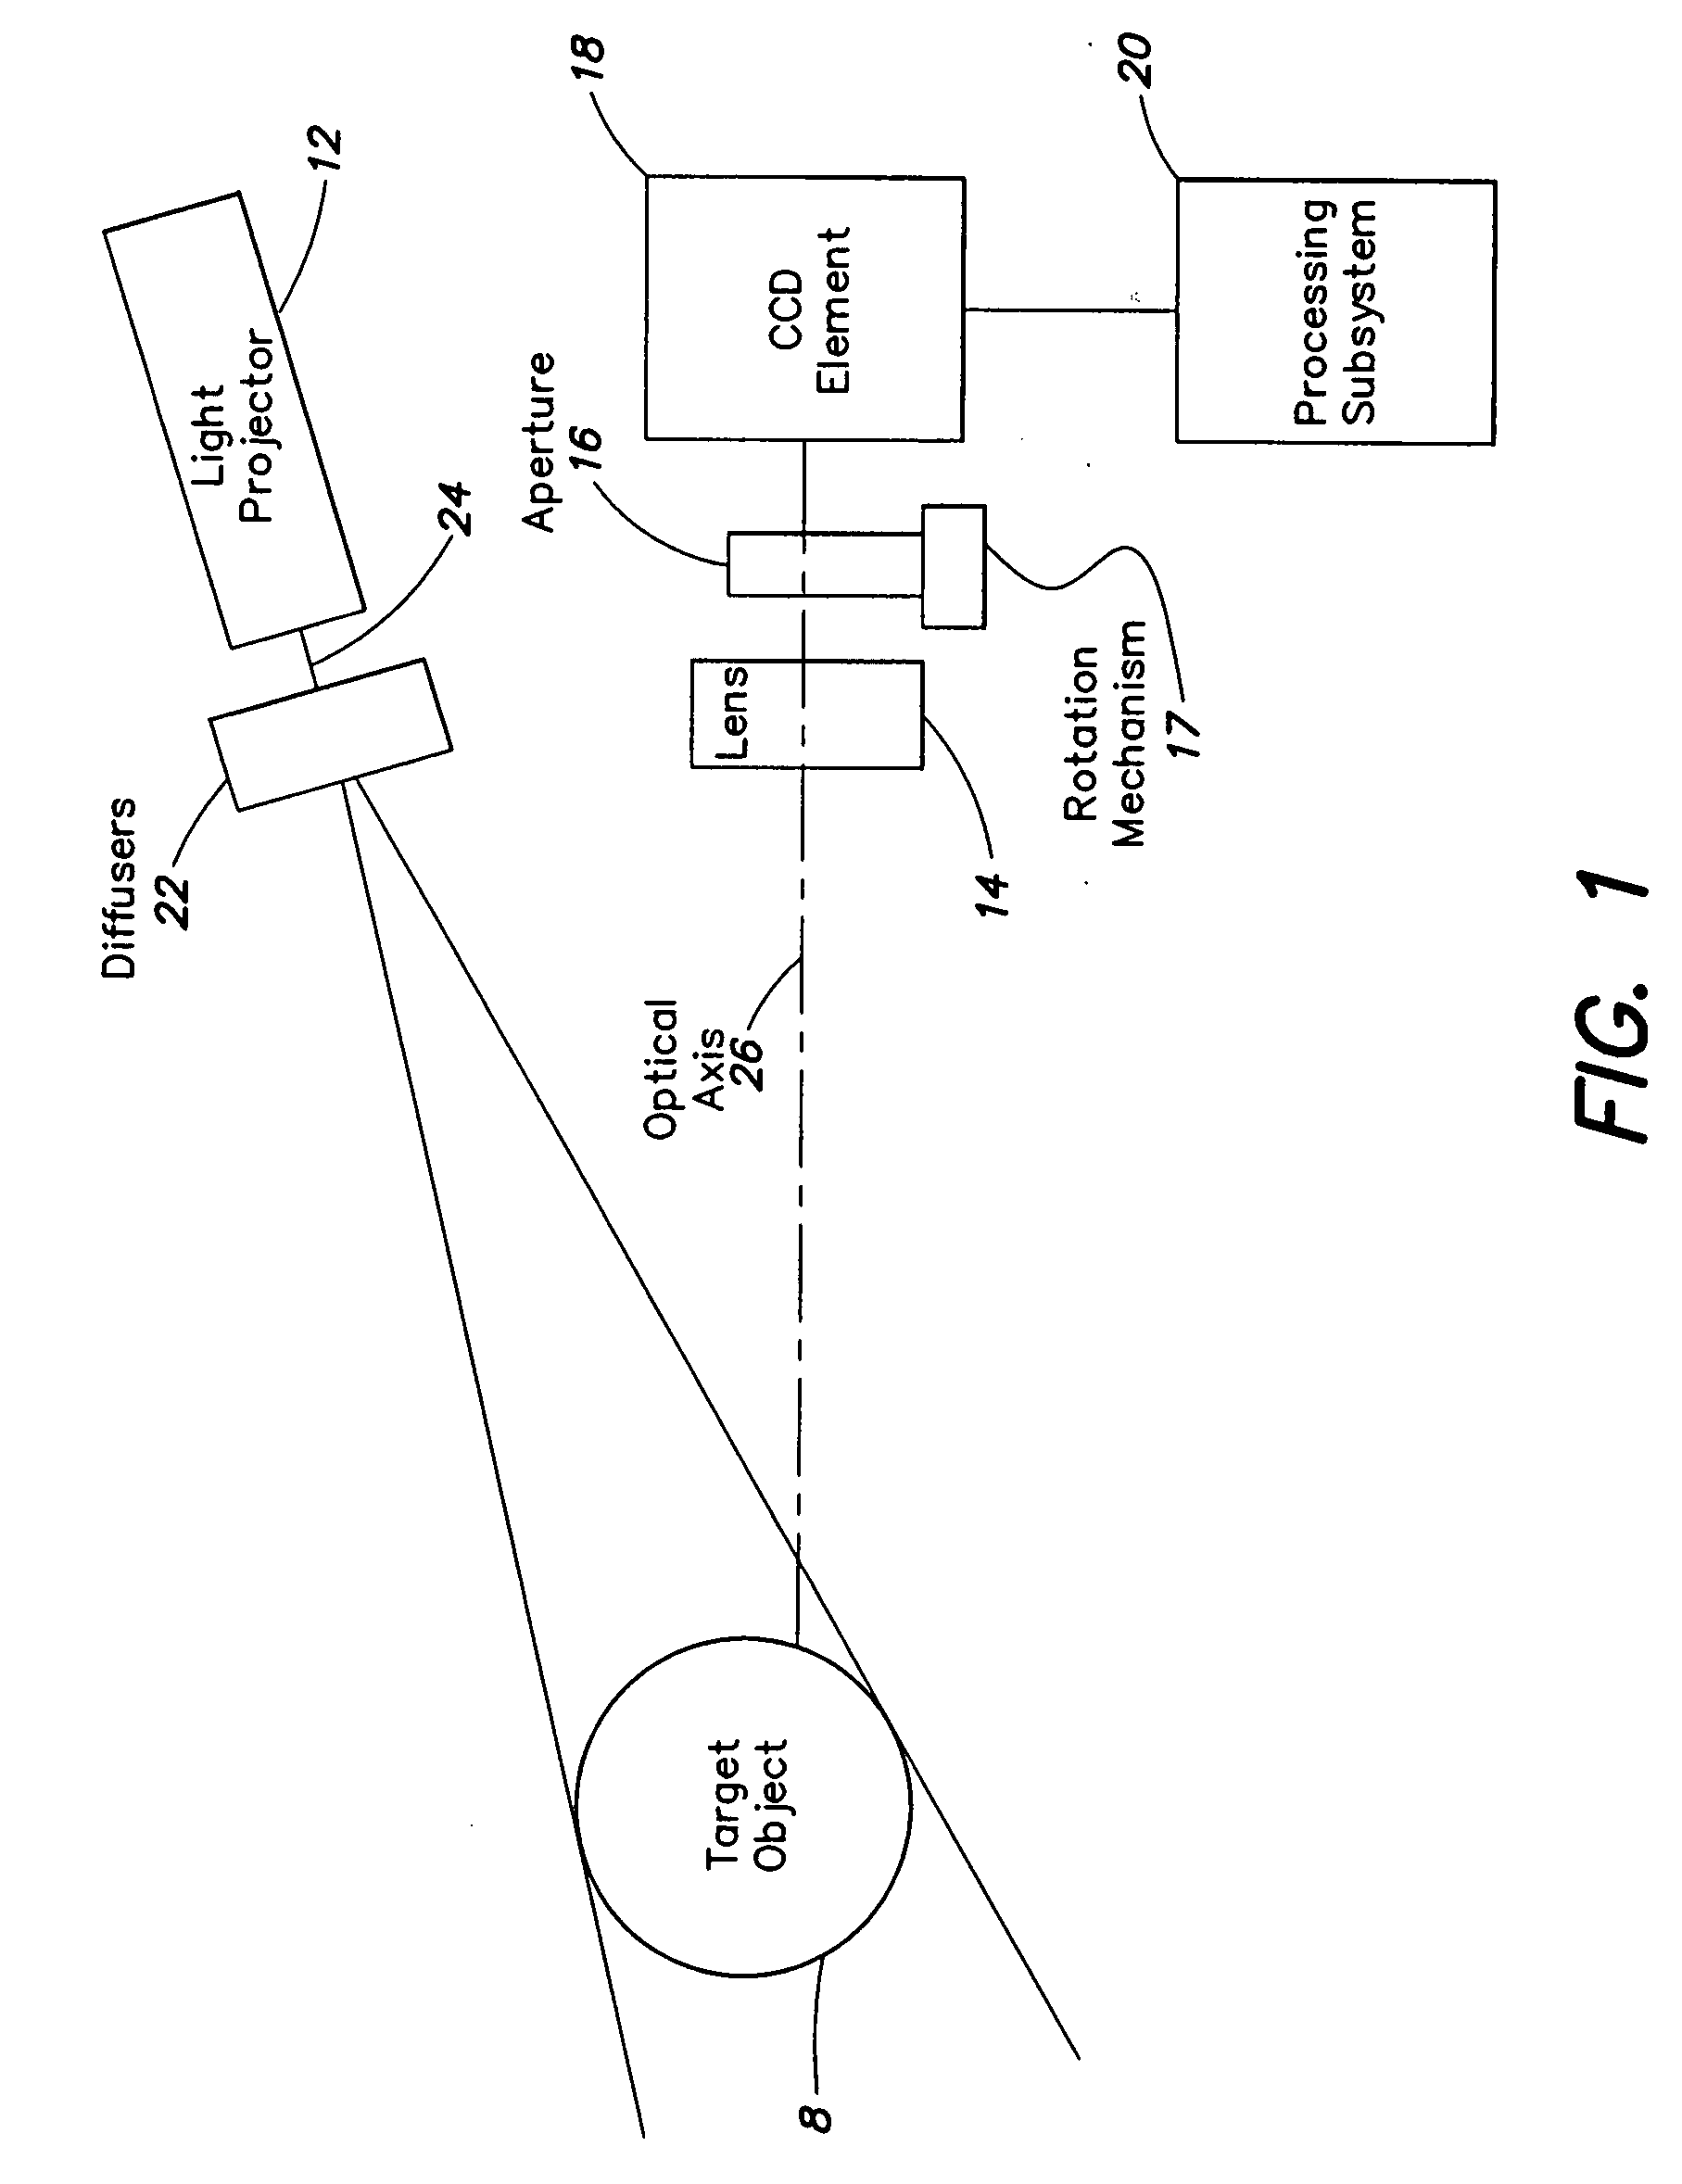 Method and system for high resolution, ultra fast 3-D imaging